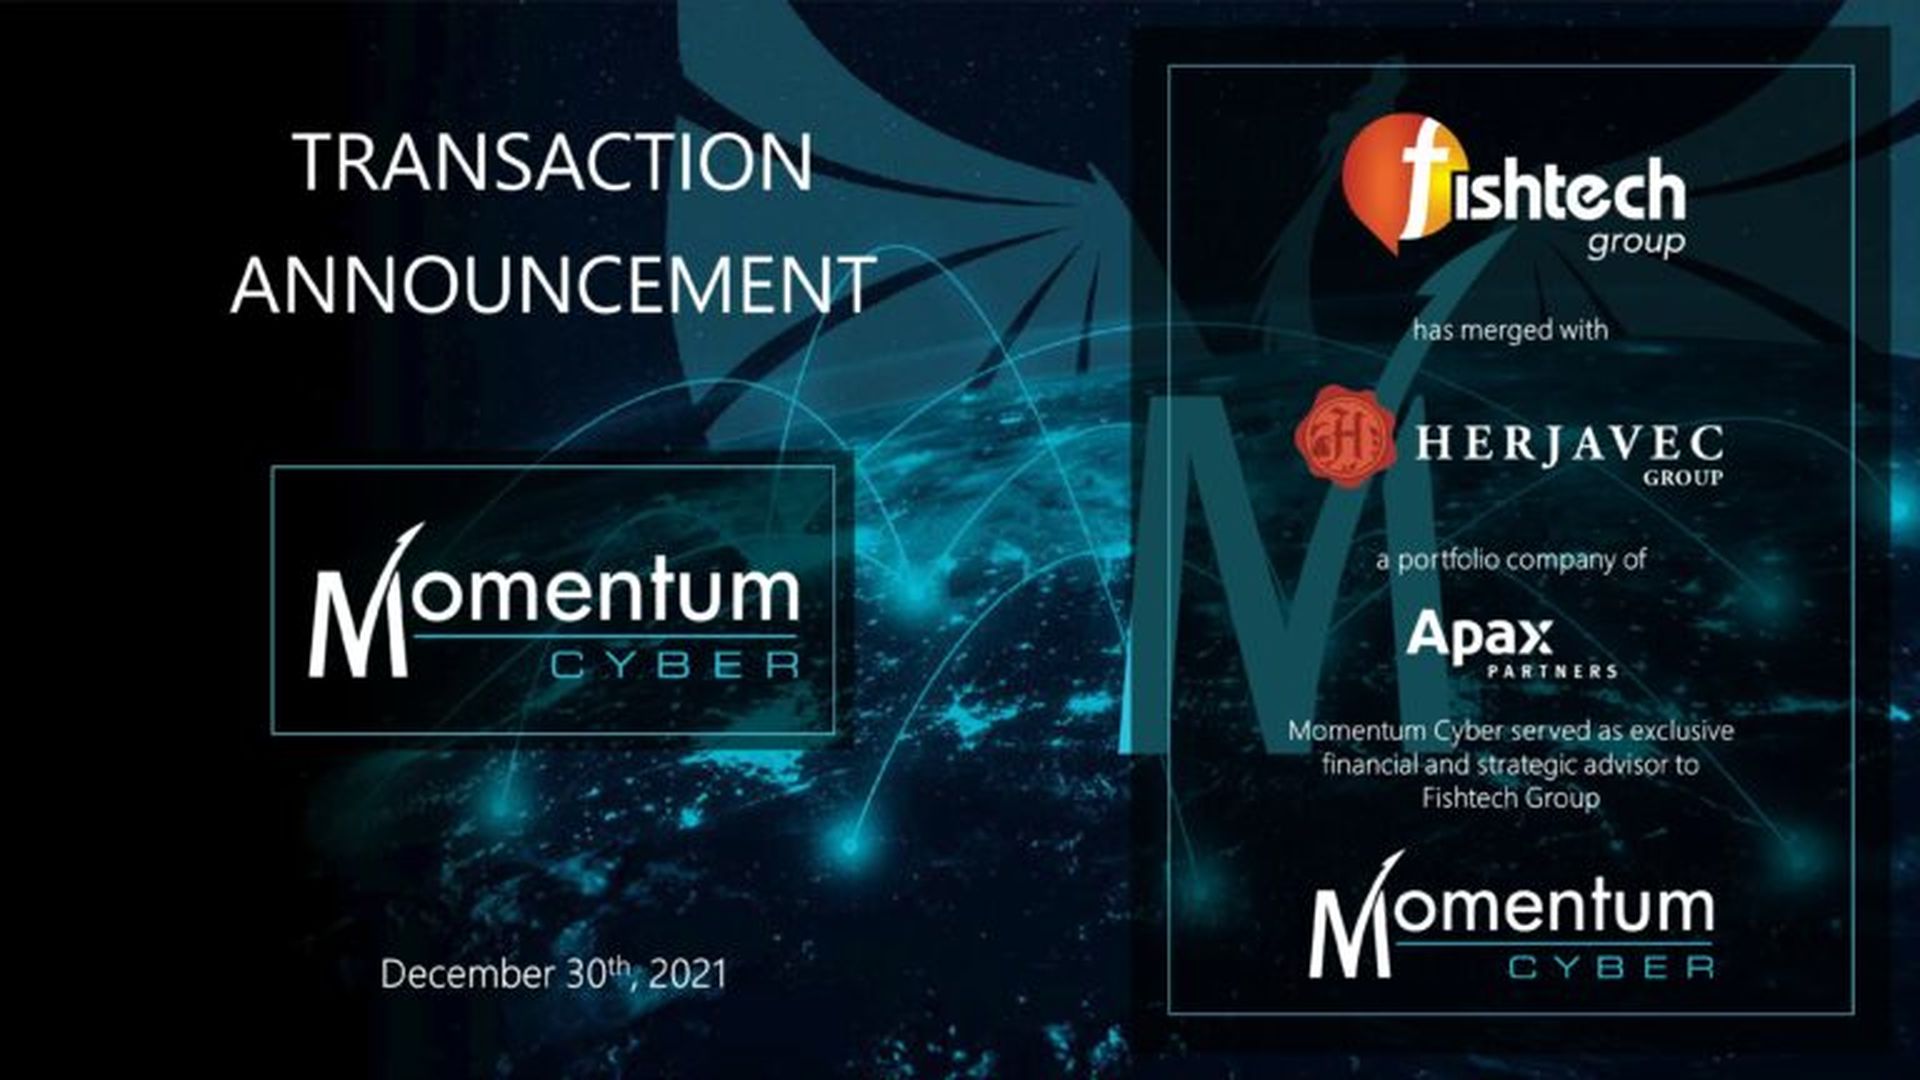 Momentum Cyber advised on the merger of two award-winning cybersecurity solutions providers, Fishtech Group and Herjavec Group, who announced their merger on Dec. 30, 2021.